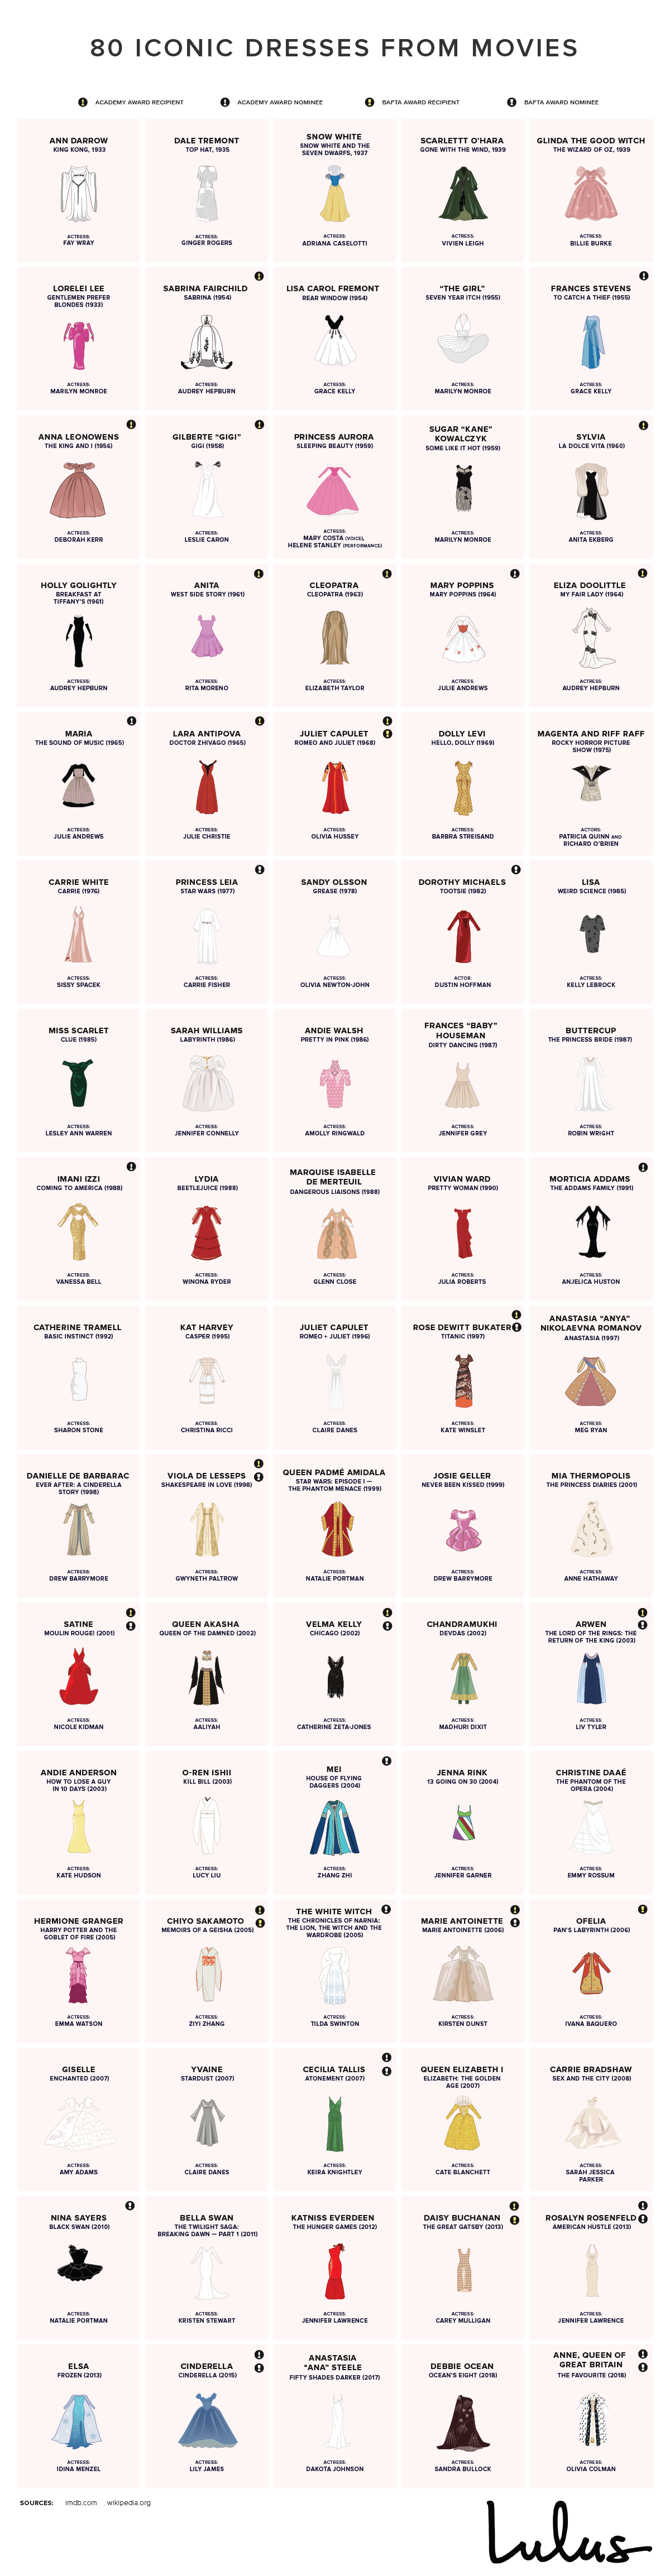 infographic of 80 iconic dresses from movies